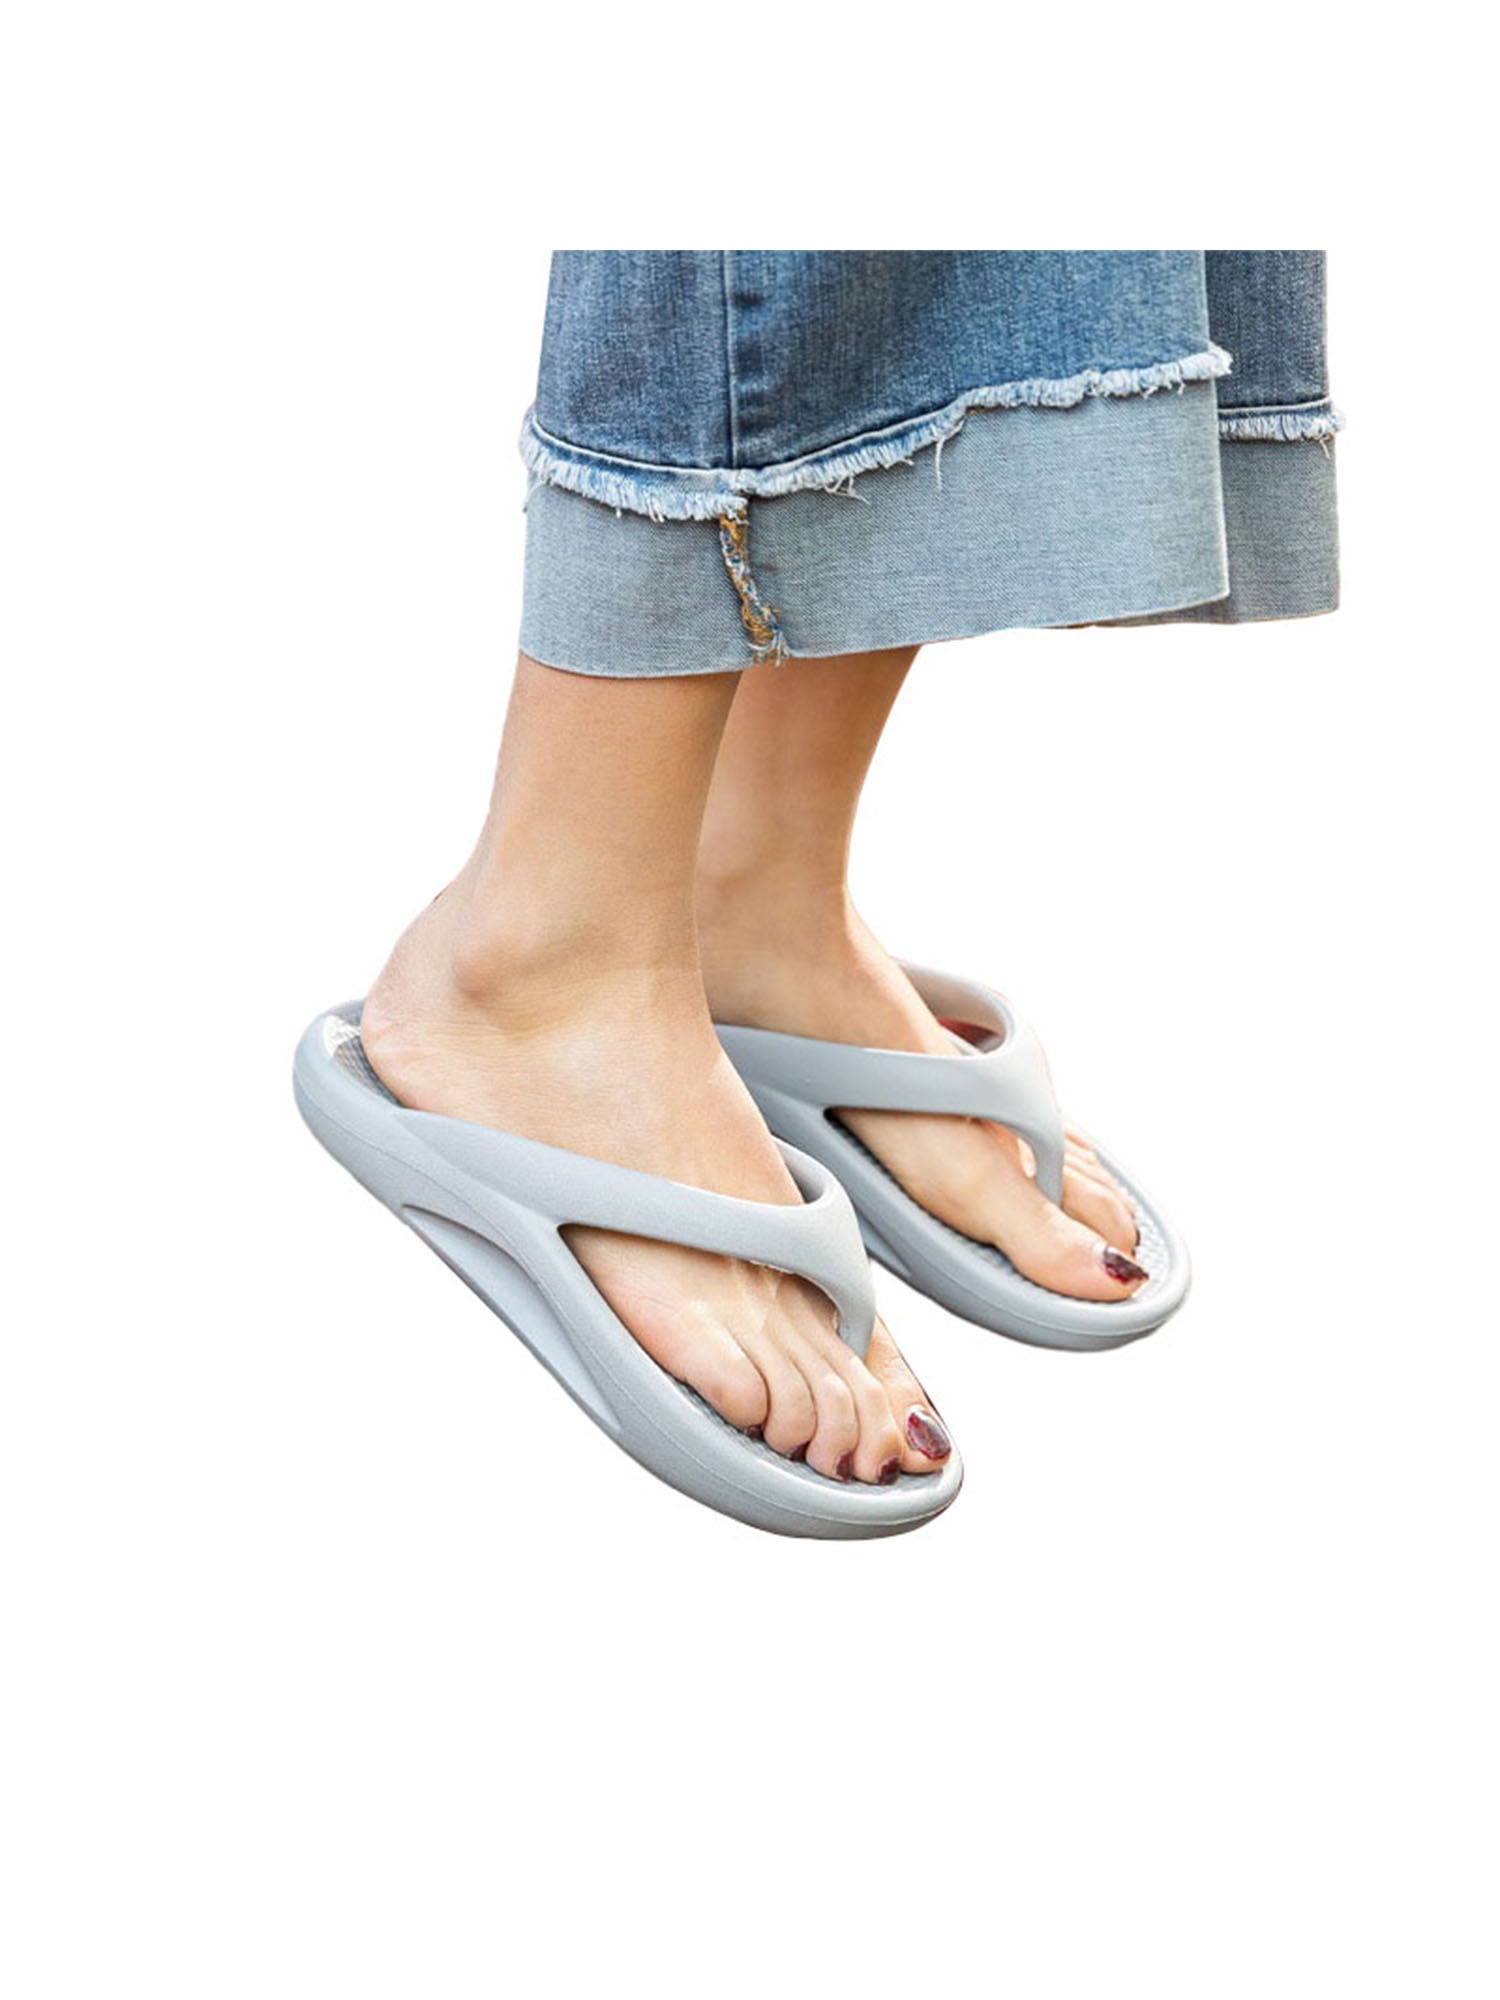 Mens Soft Summer Cross Over Straps Sandals Casual Beach Pool Shower Garden Casual Mules Comfort Surf Walk Gents Outdoor Holiday Flip Flop Strappy Shoes